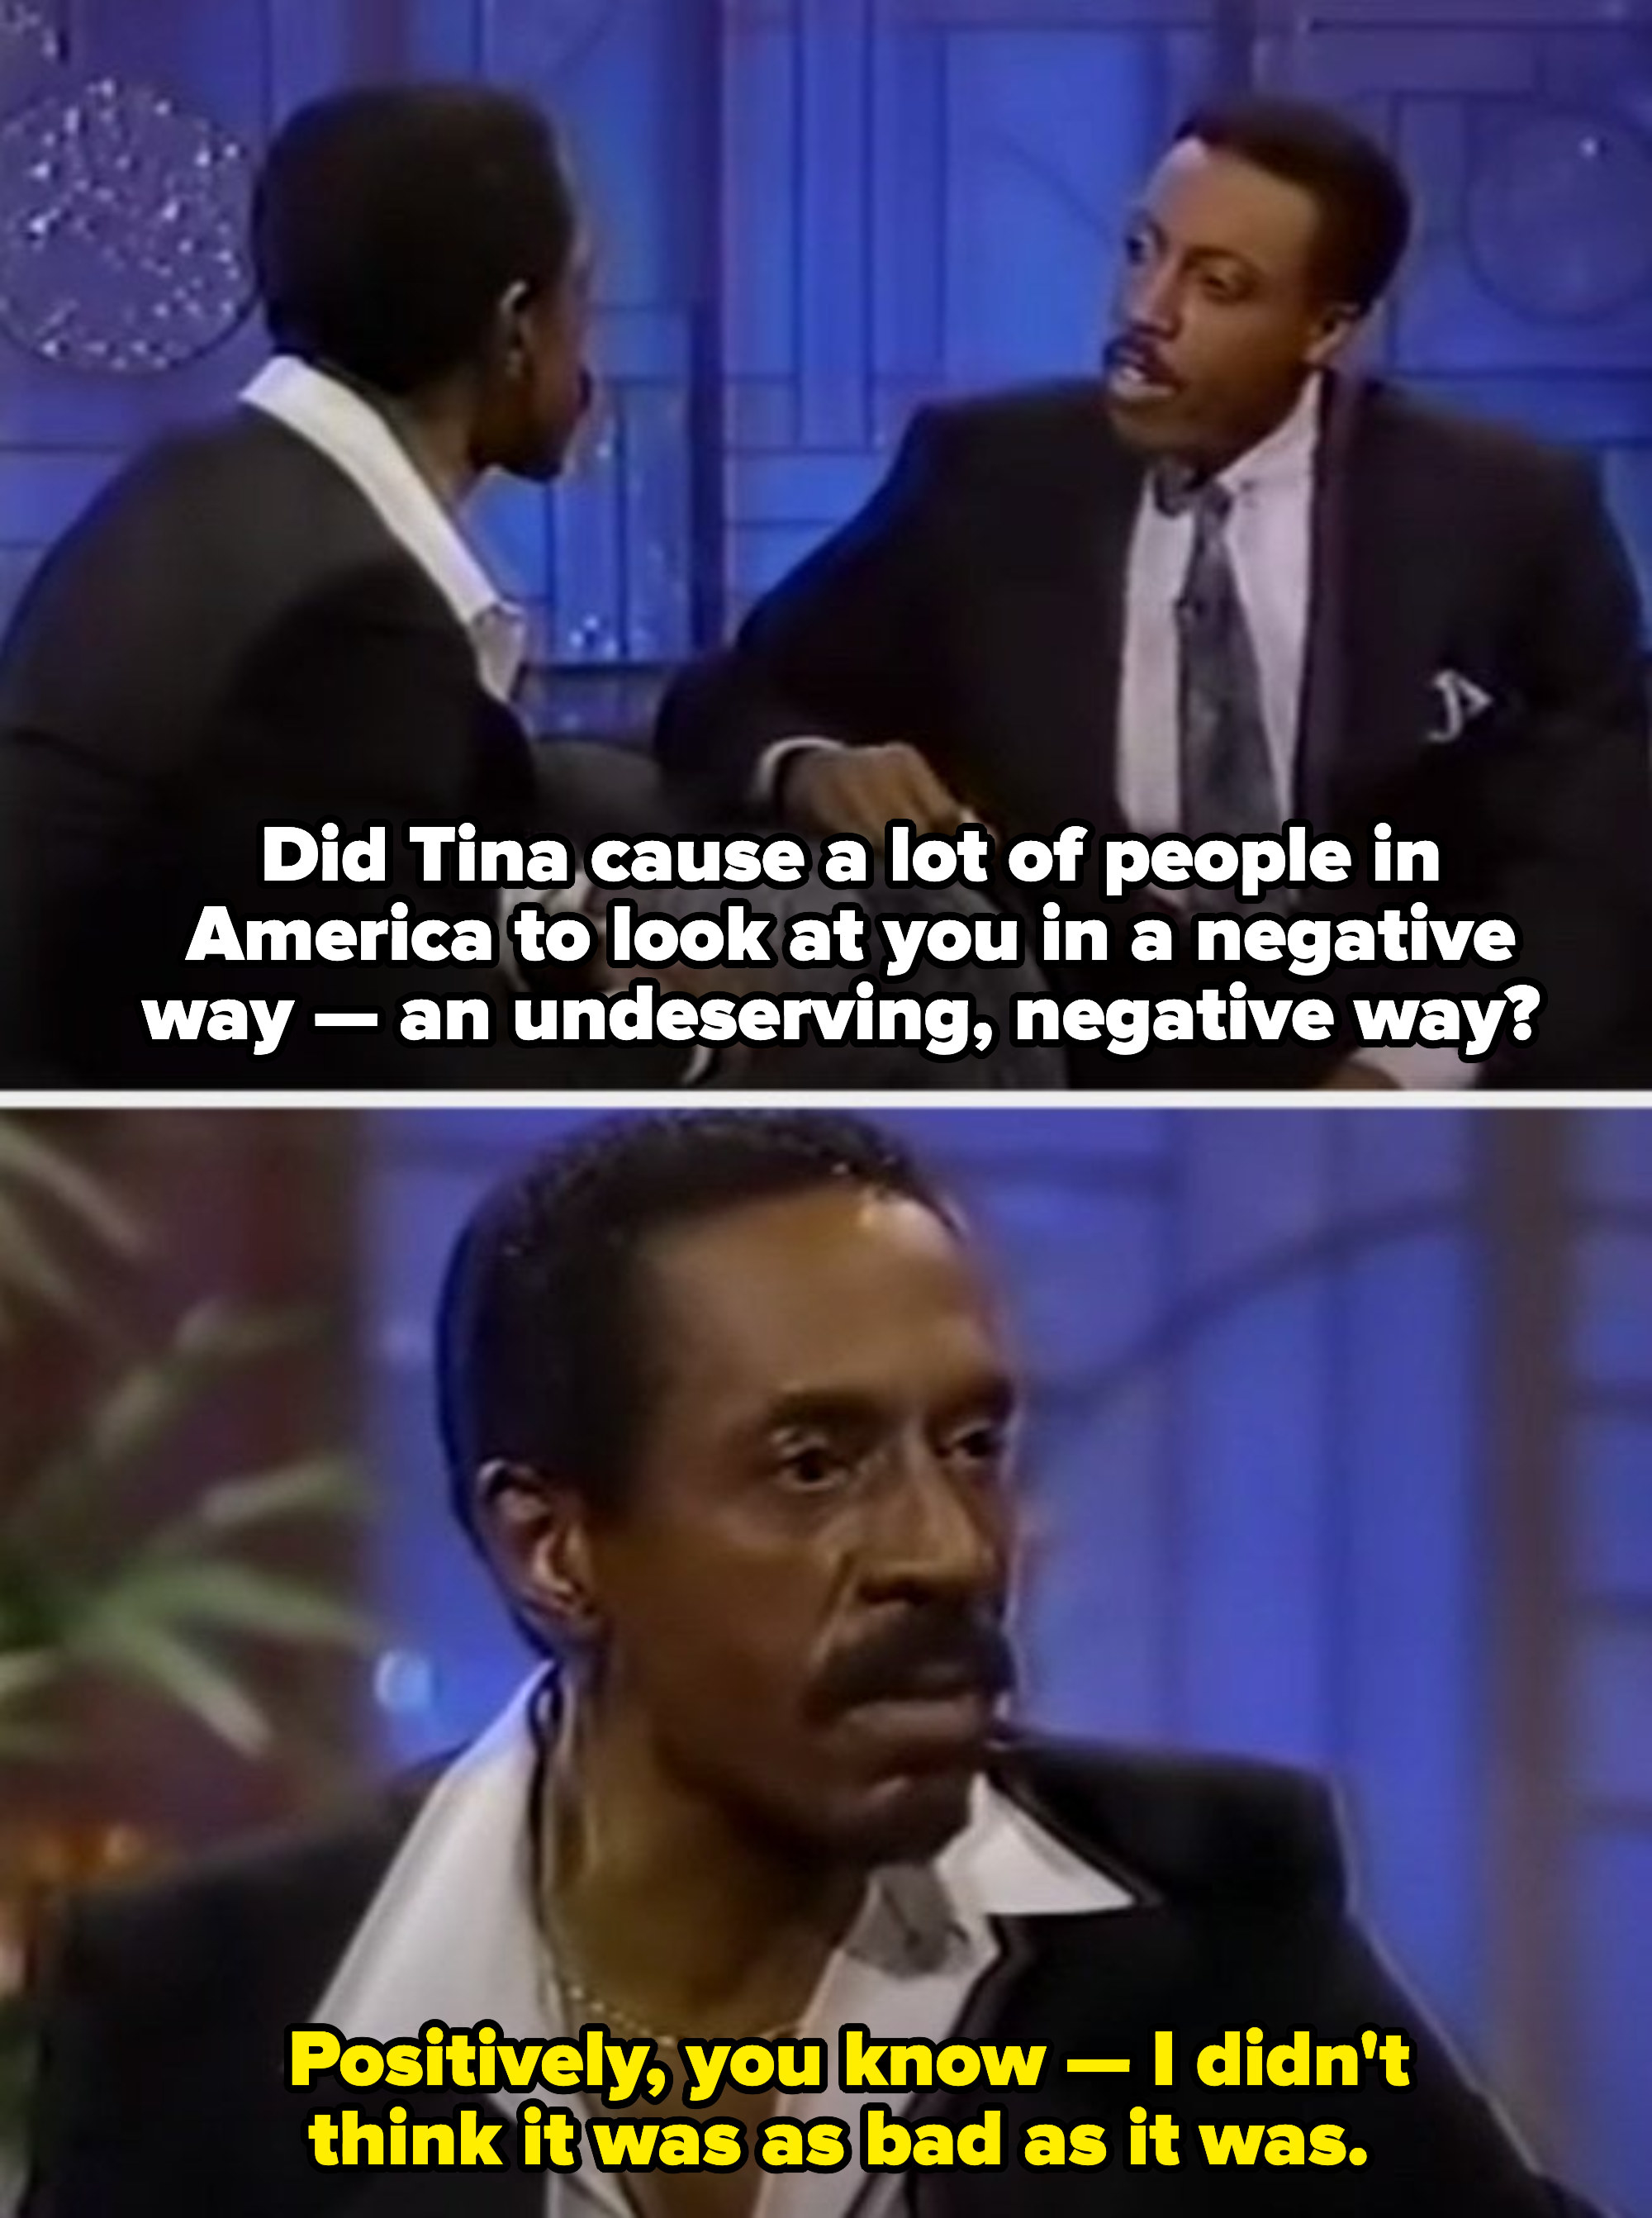 Arsenio asking Ike if Tina caused Americans to look at him in a negative way, and Ike responding with: &quot;Positively. I didn&#x27;t think it was as bad as it was&quot;